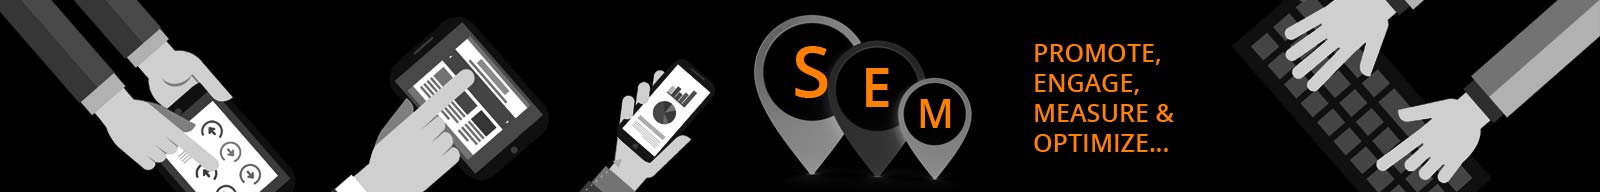 Search Engine Marketing Services / SEM (PPC) : iMz Media Solutions